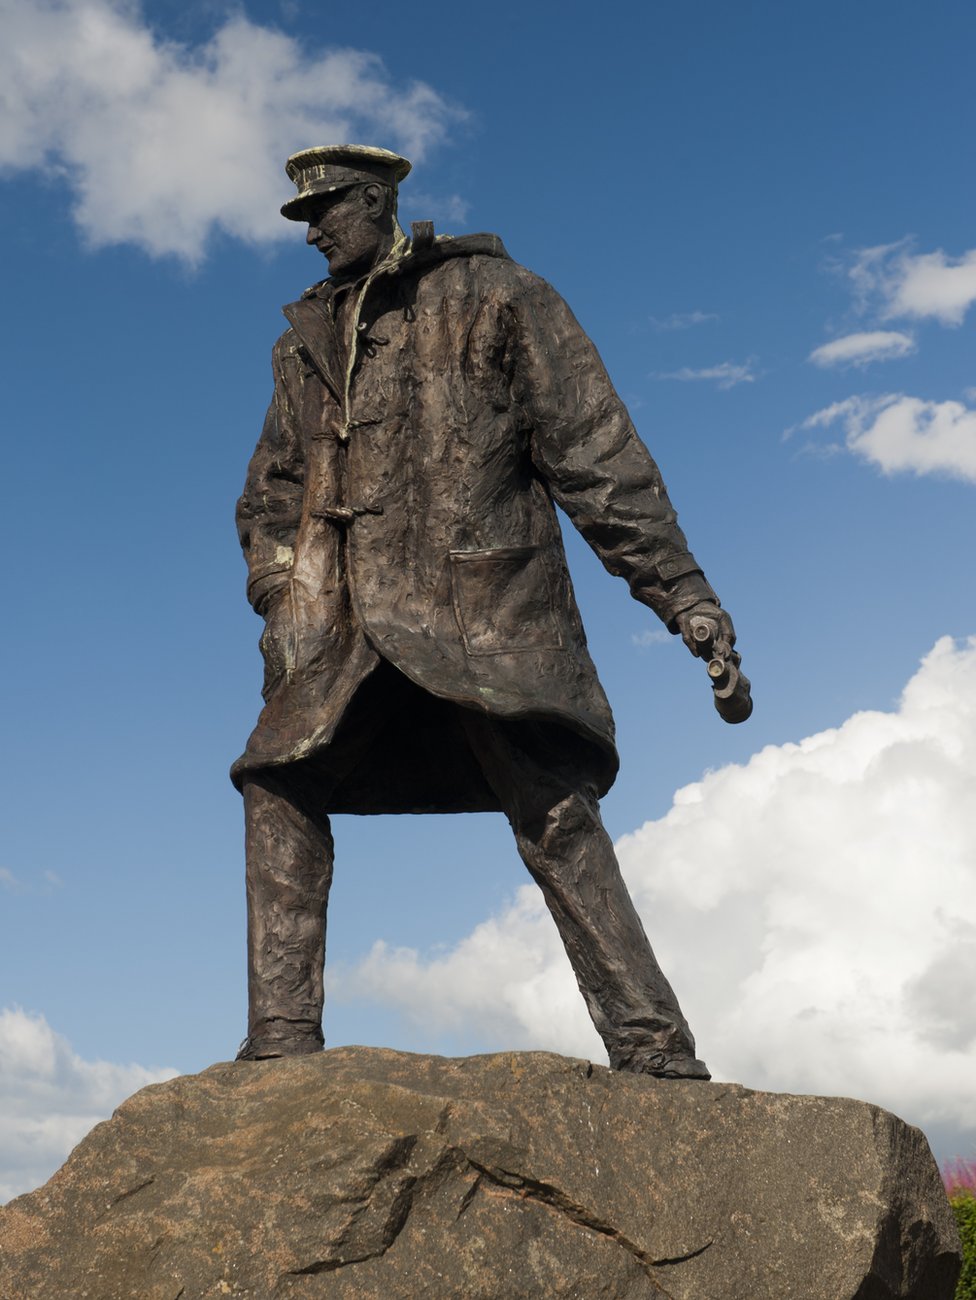 Sir David Stirling, founder of the SAS, memorial statue, near Stirling, Scotland. (Photo by: Wayne Hutchinson/Farm Images/Universal Images Group via Getty Images)